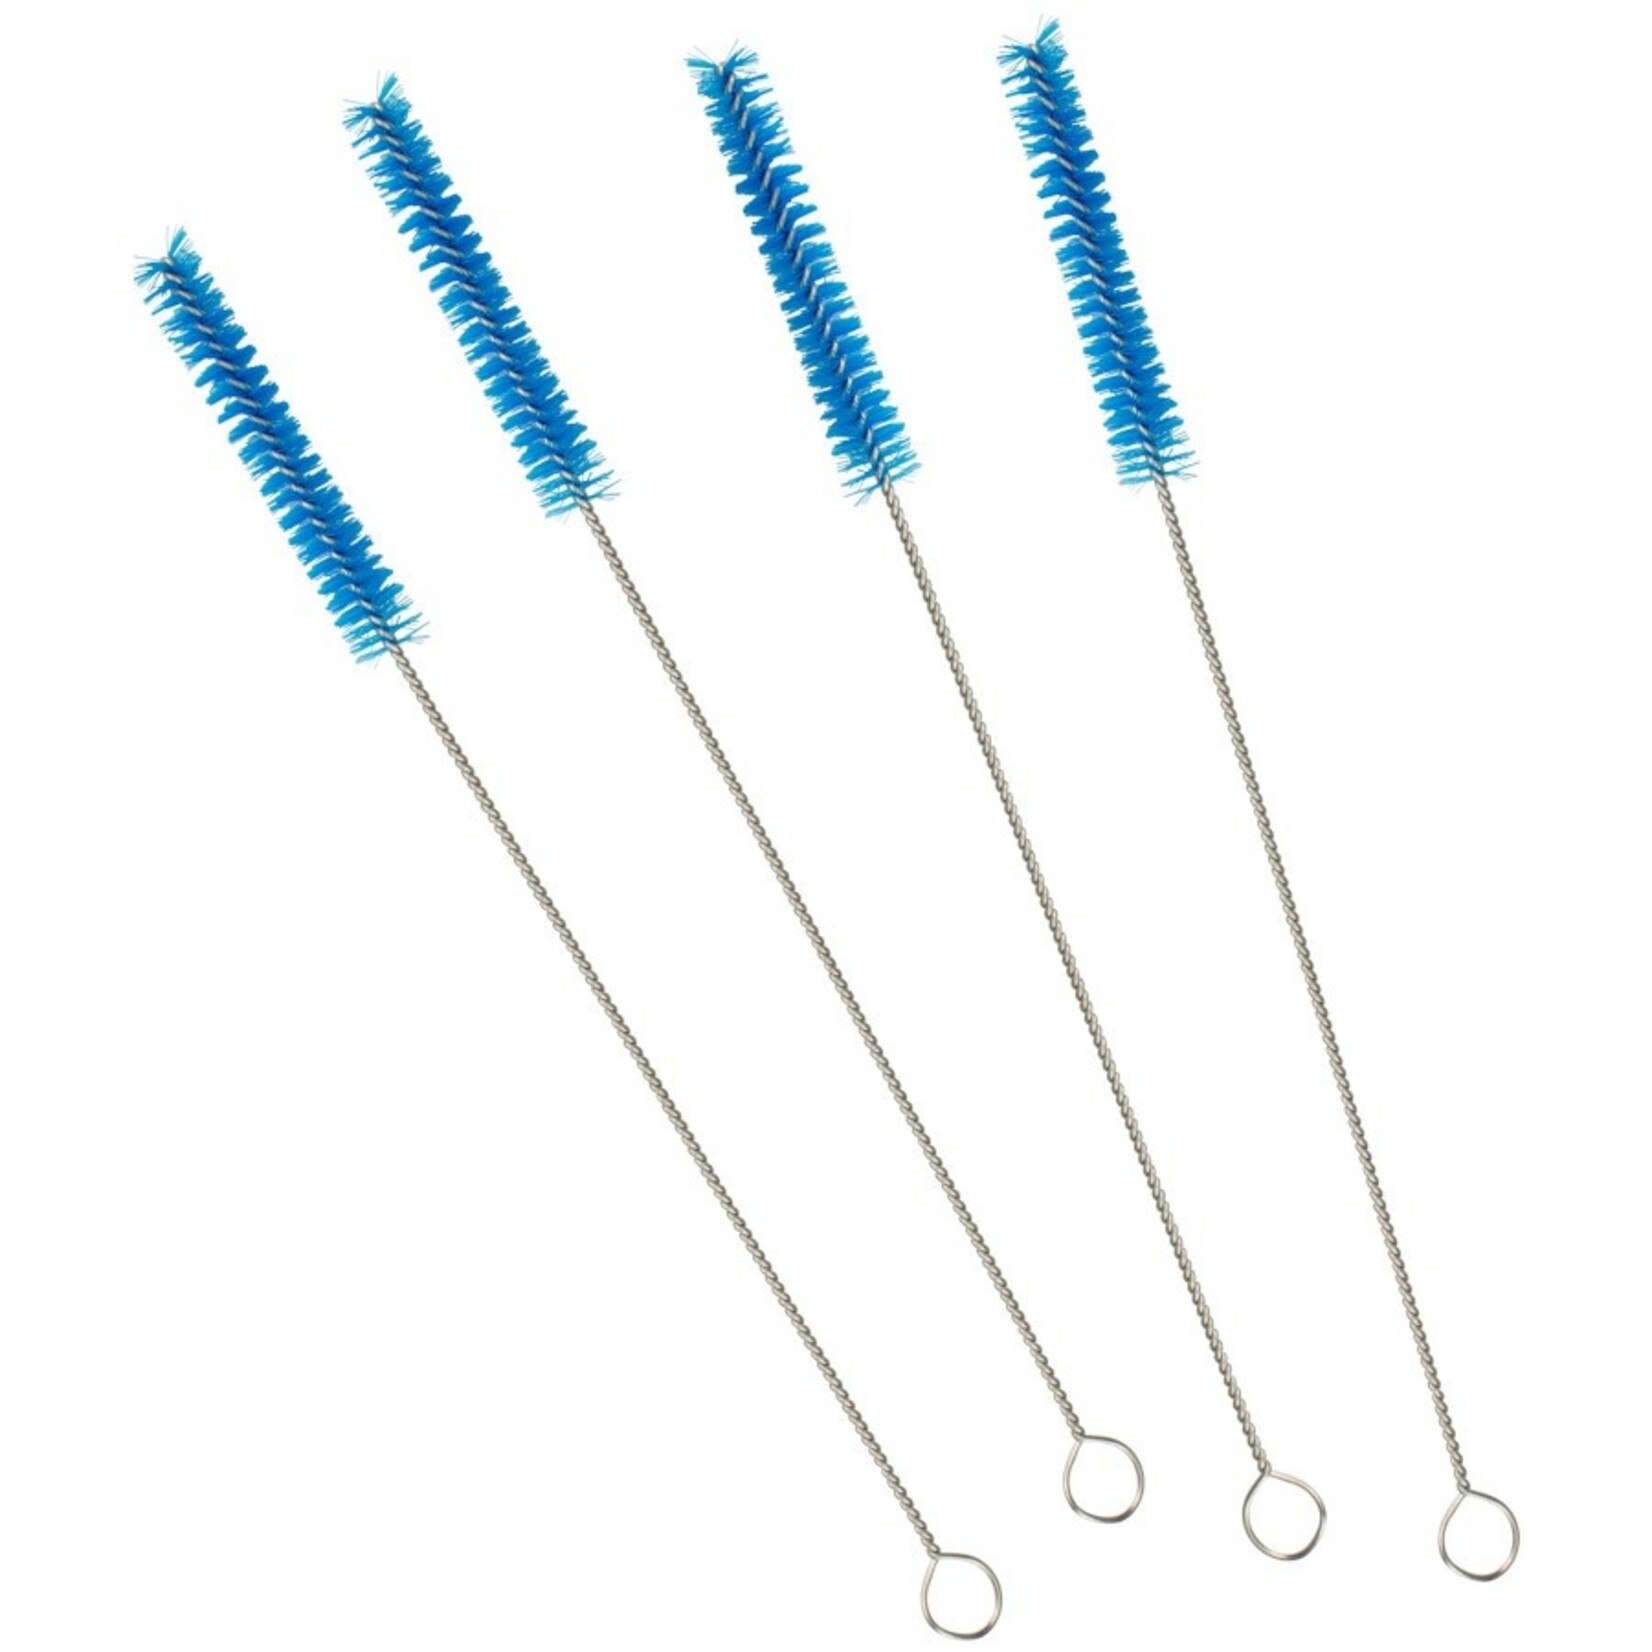 Dr Browns DR BROWNS CLEANING BRUSHES 4PK